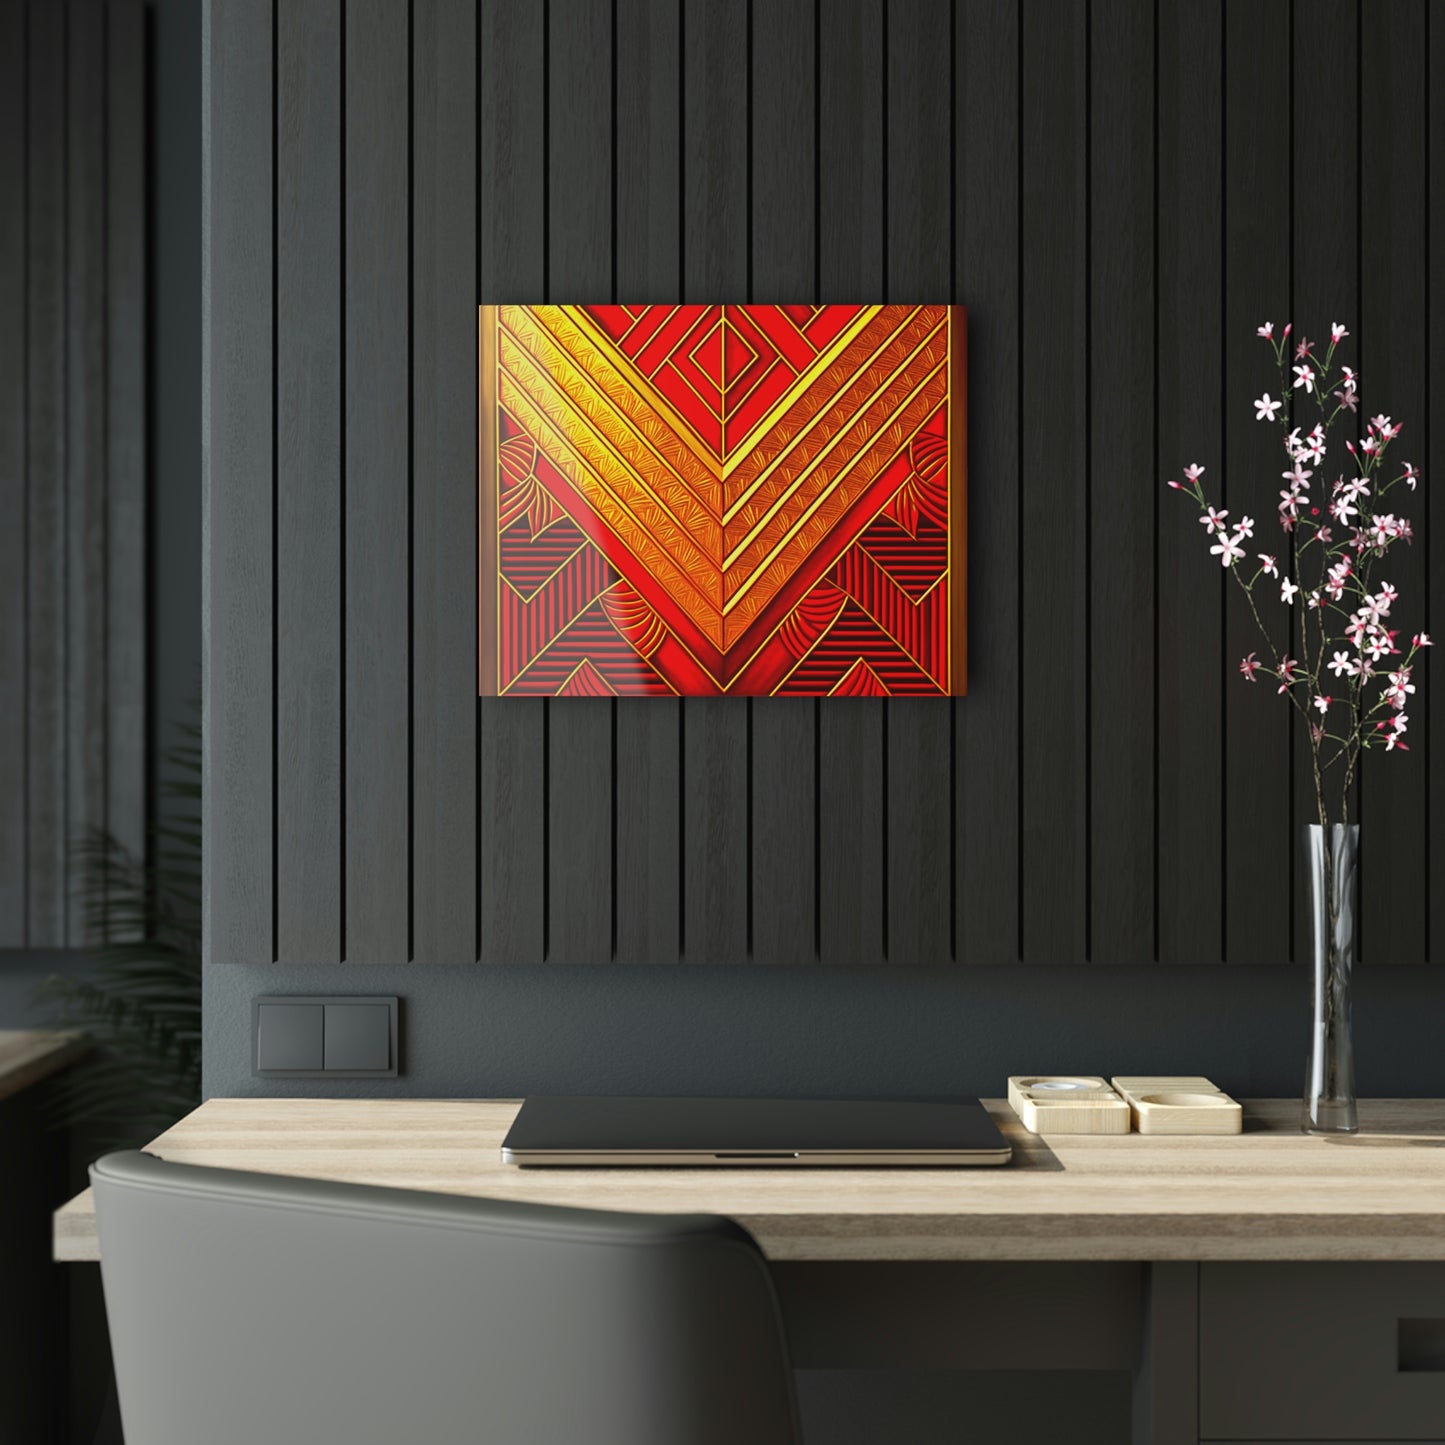 Red and Gold Triangles Acrylic Prints